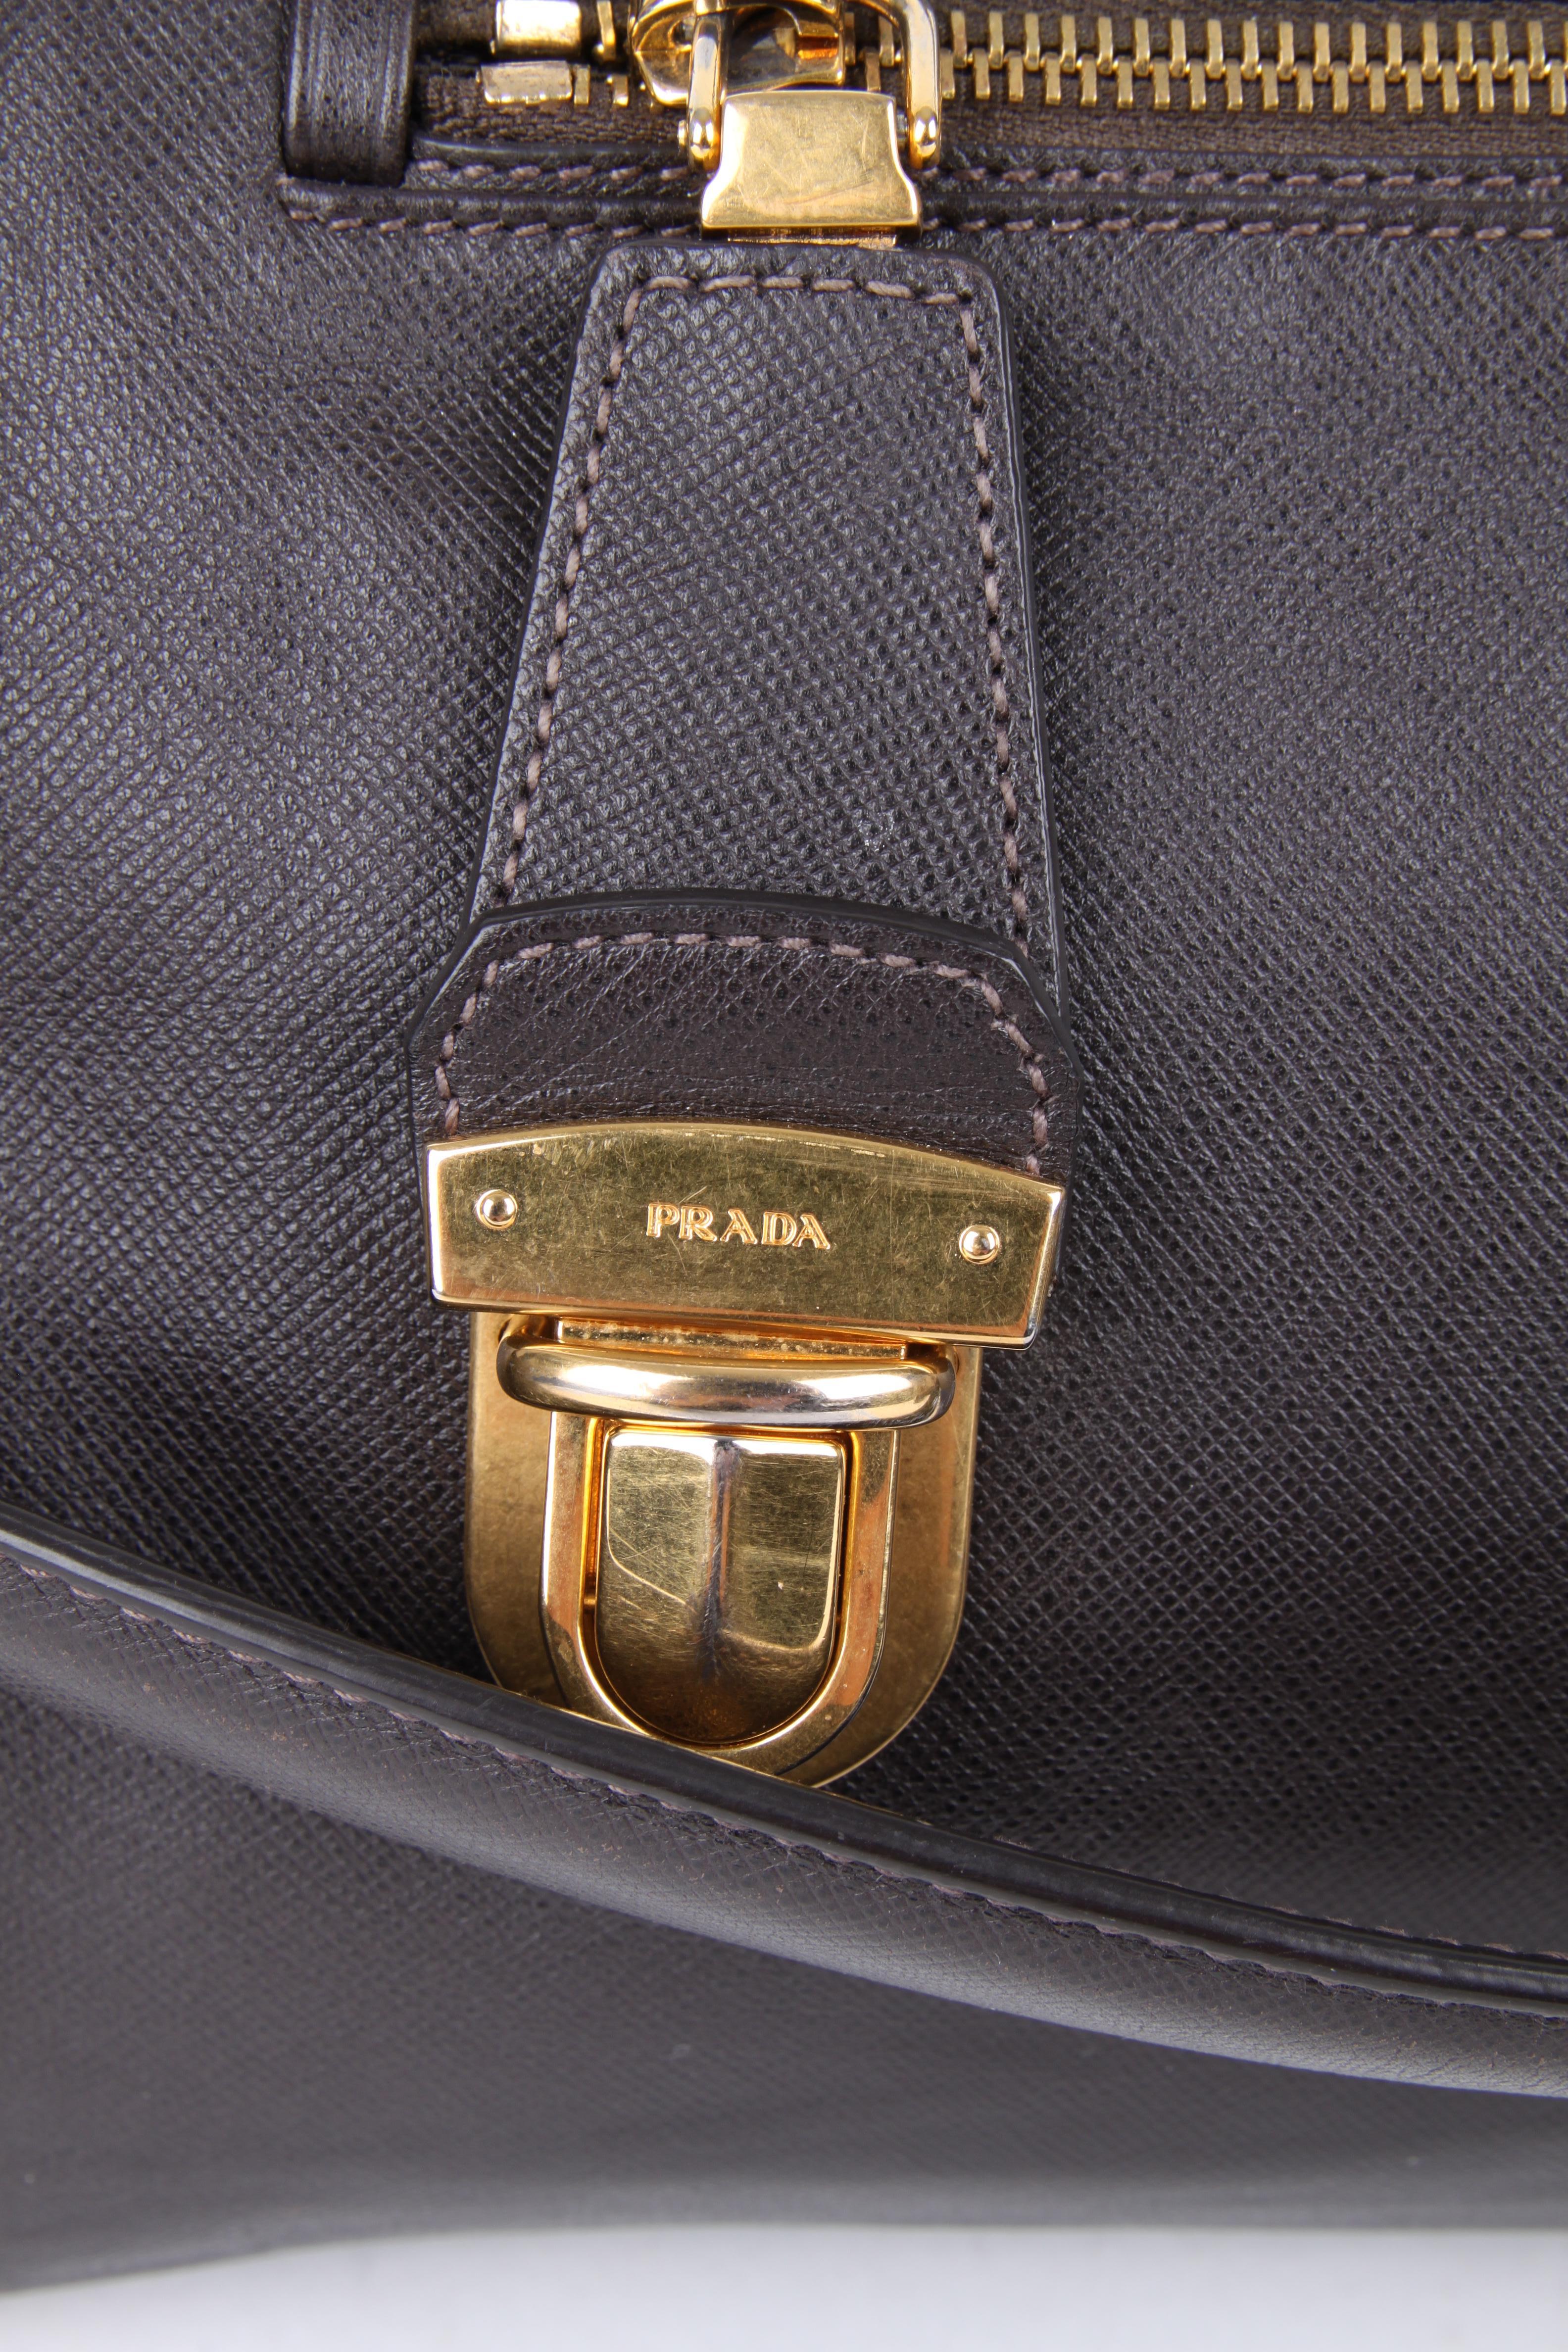 Prada Brown Leather Green Canvas Handbag.

This little bag makes a big statement. It features leather exterior with matching brown leather handles. The bag features a brown silk lining, zipper closure, one main compartment and two side compartments.